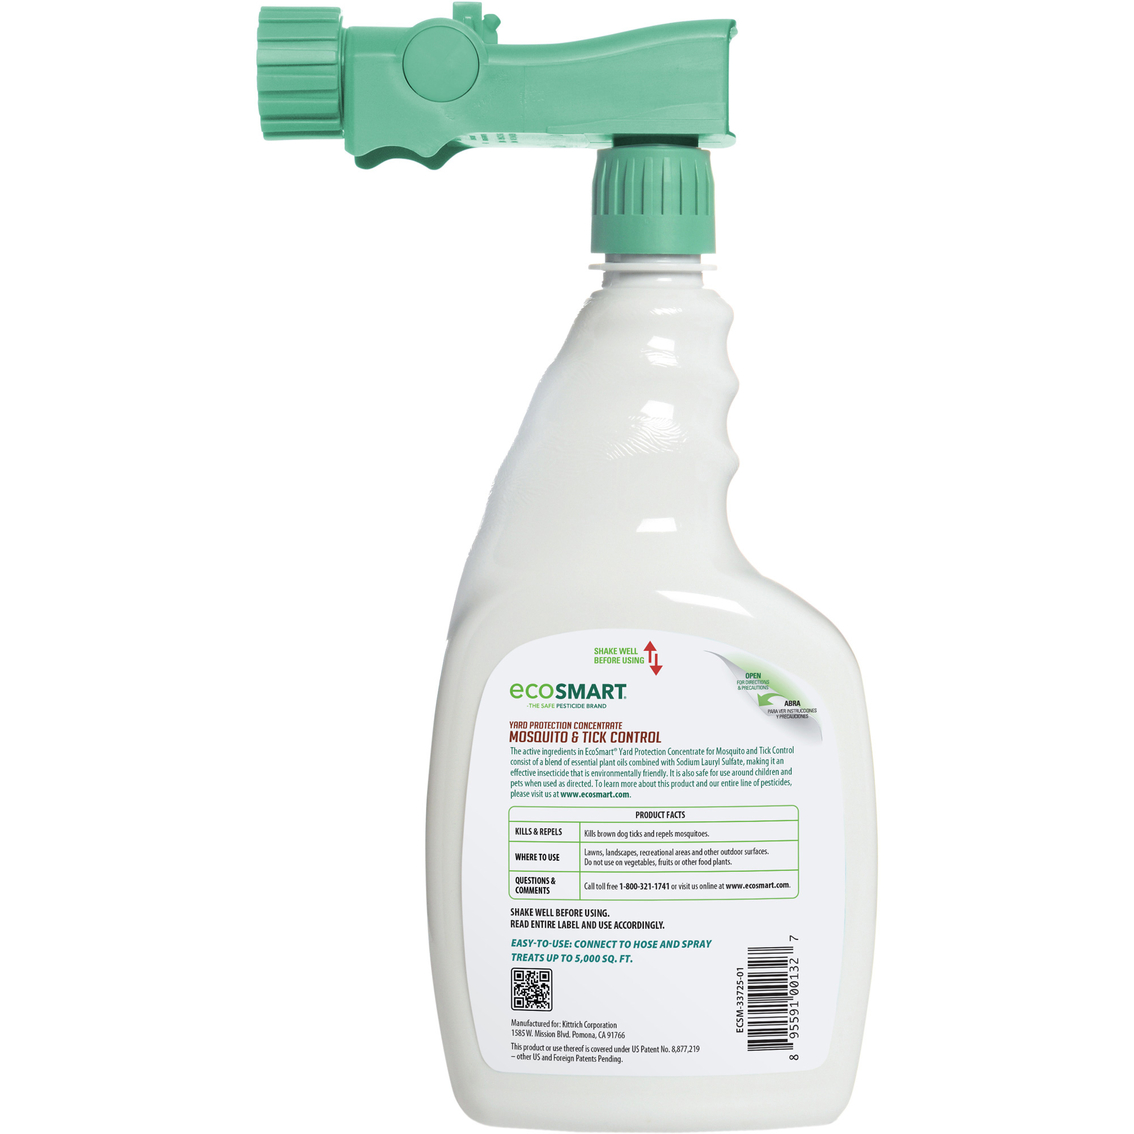 Eco Smart Mosquito and Tick Concentrate 32 oz. Sprayer - Image 2 of 2